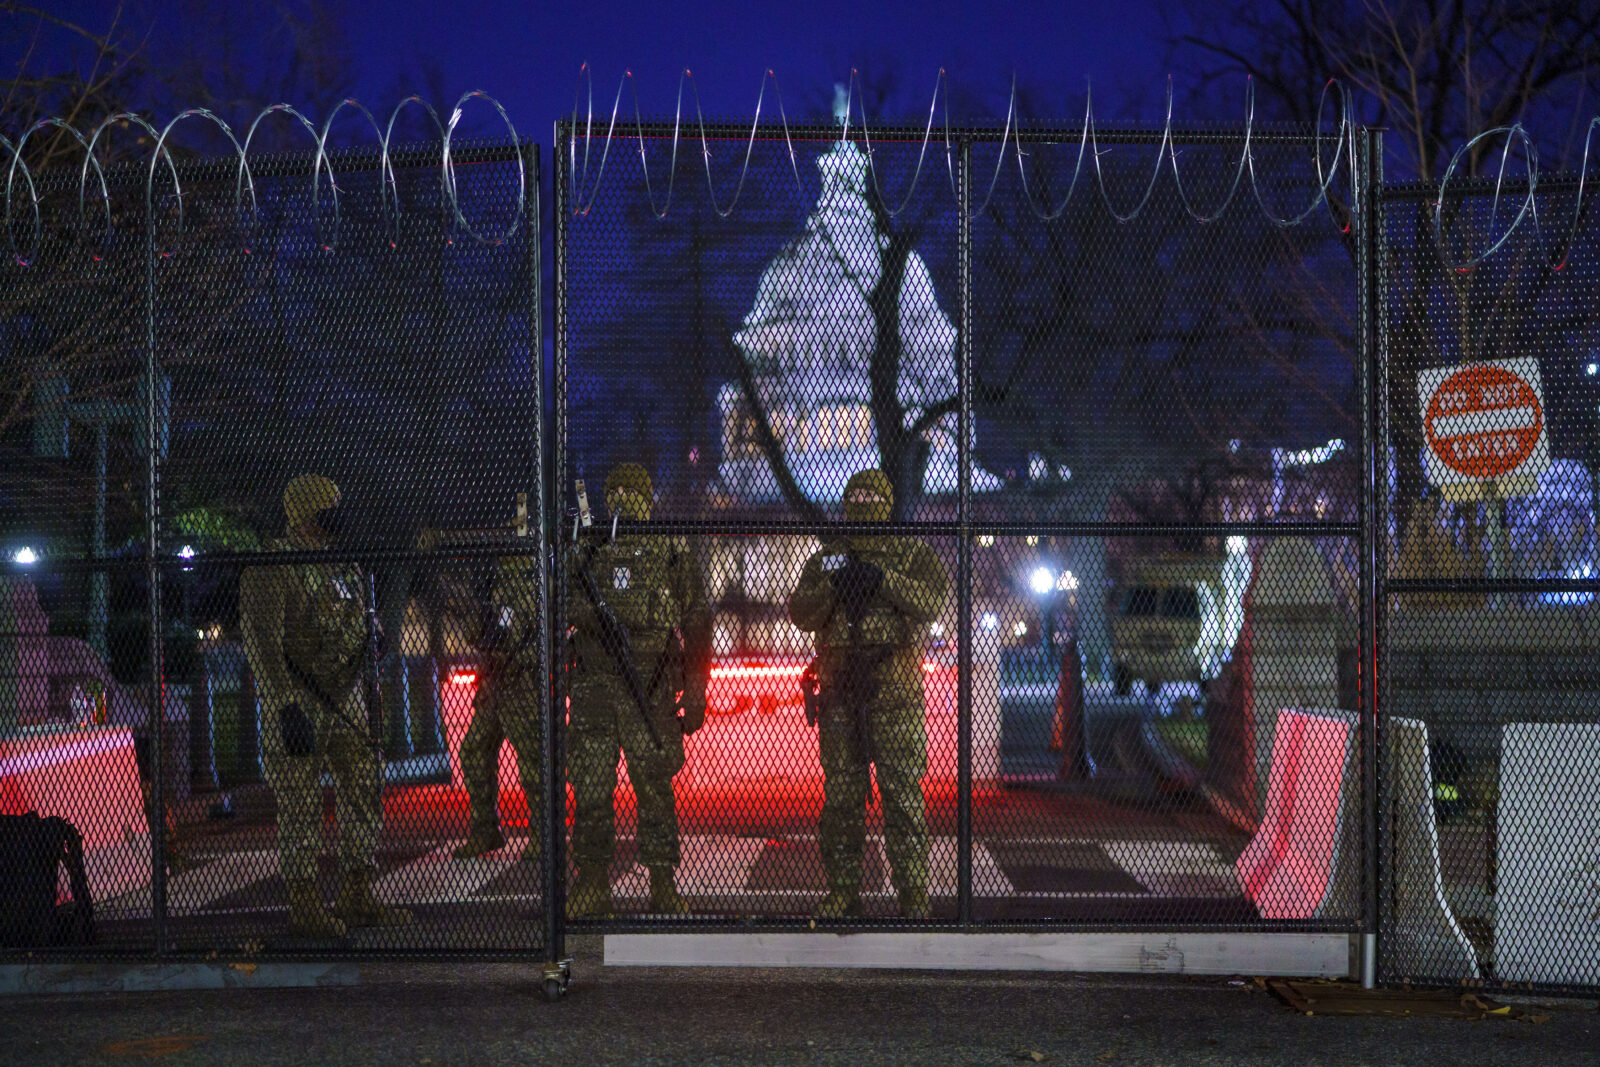 National Guard troops reinforce the security zone on Capitol Hill in Washington, Tuesday, Jan. 19, 2021, before President-elect Joe Biden is sworn in as the 46th president on Wednesday. (AP Photo/J. Scott Applewhite)